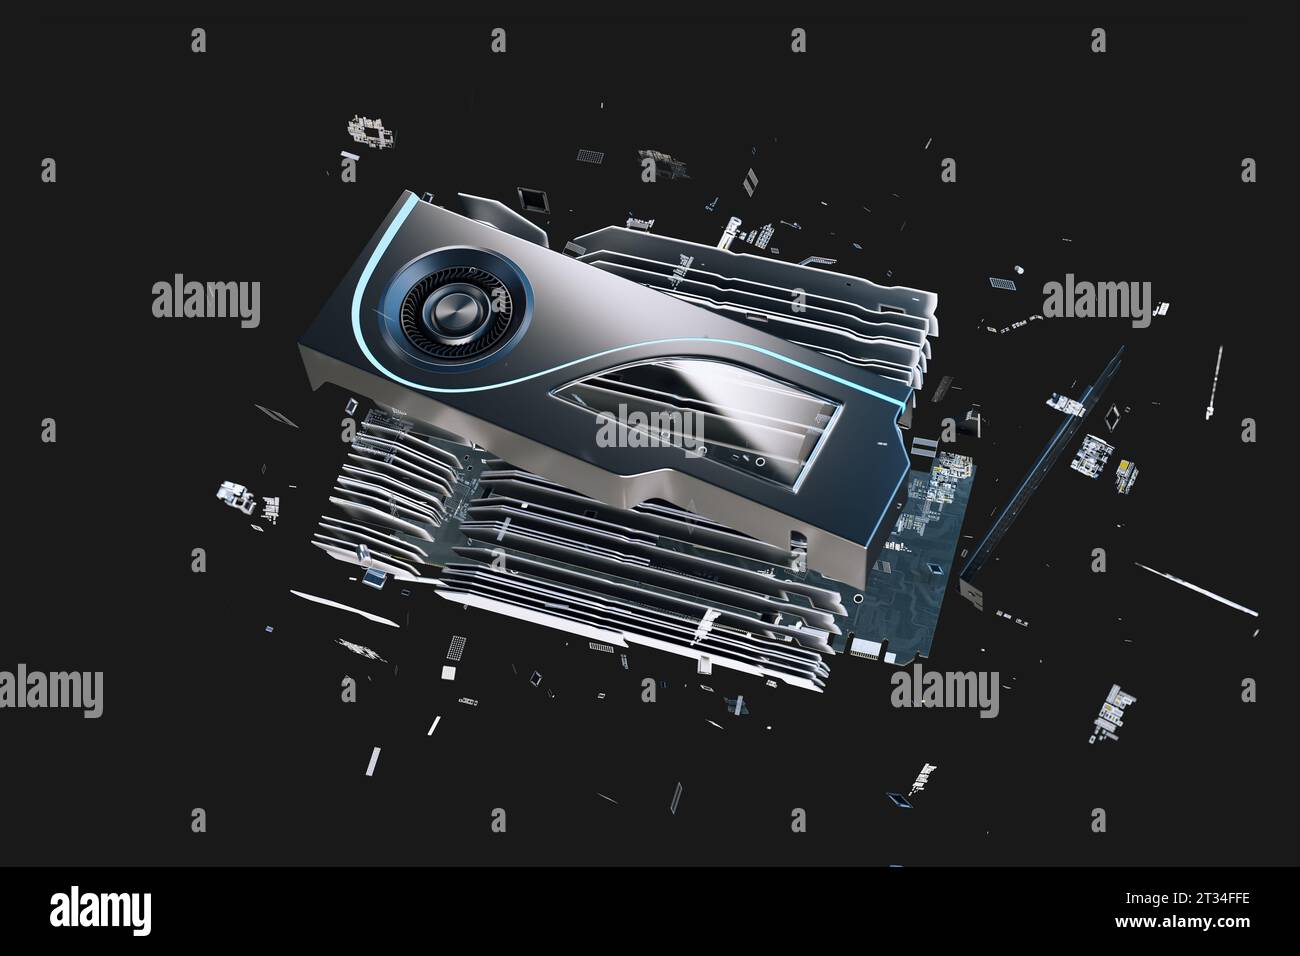 Explosion-view of a graphic card. Dissasembled video card to small pieces. Floating and spinning in space elements of GPU (graphics processing unit). Stock Photo